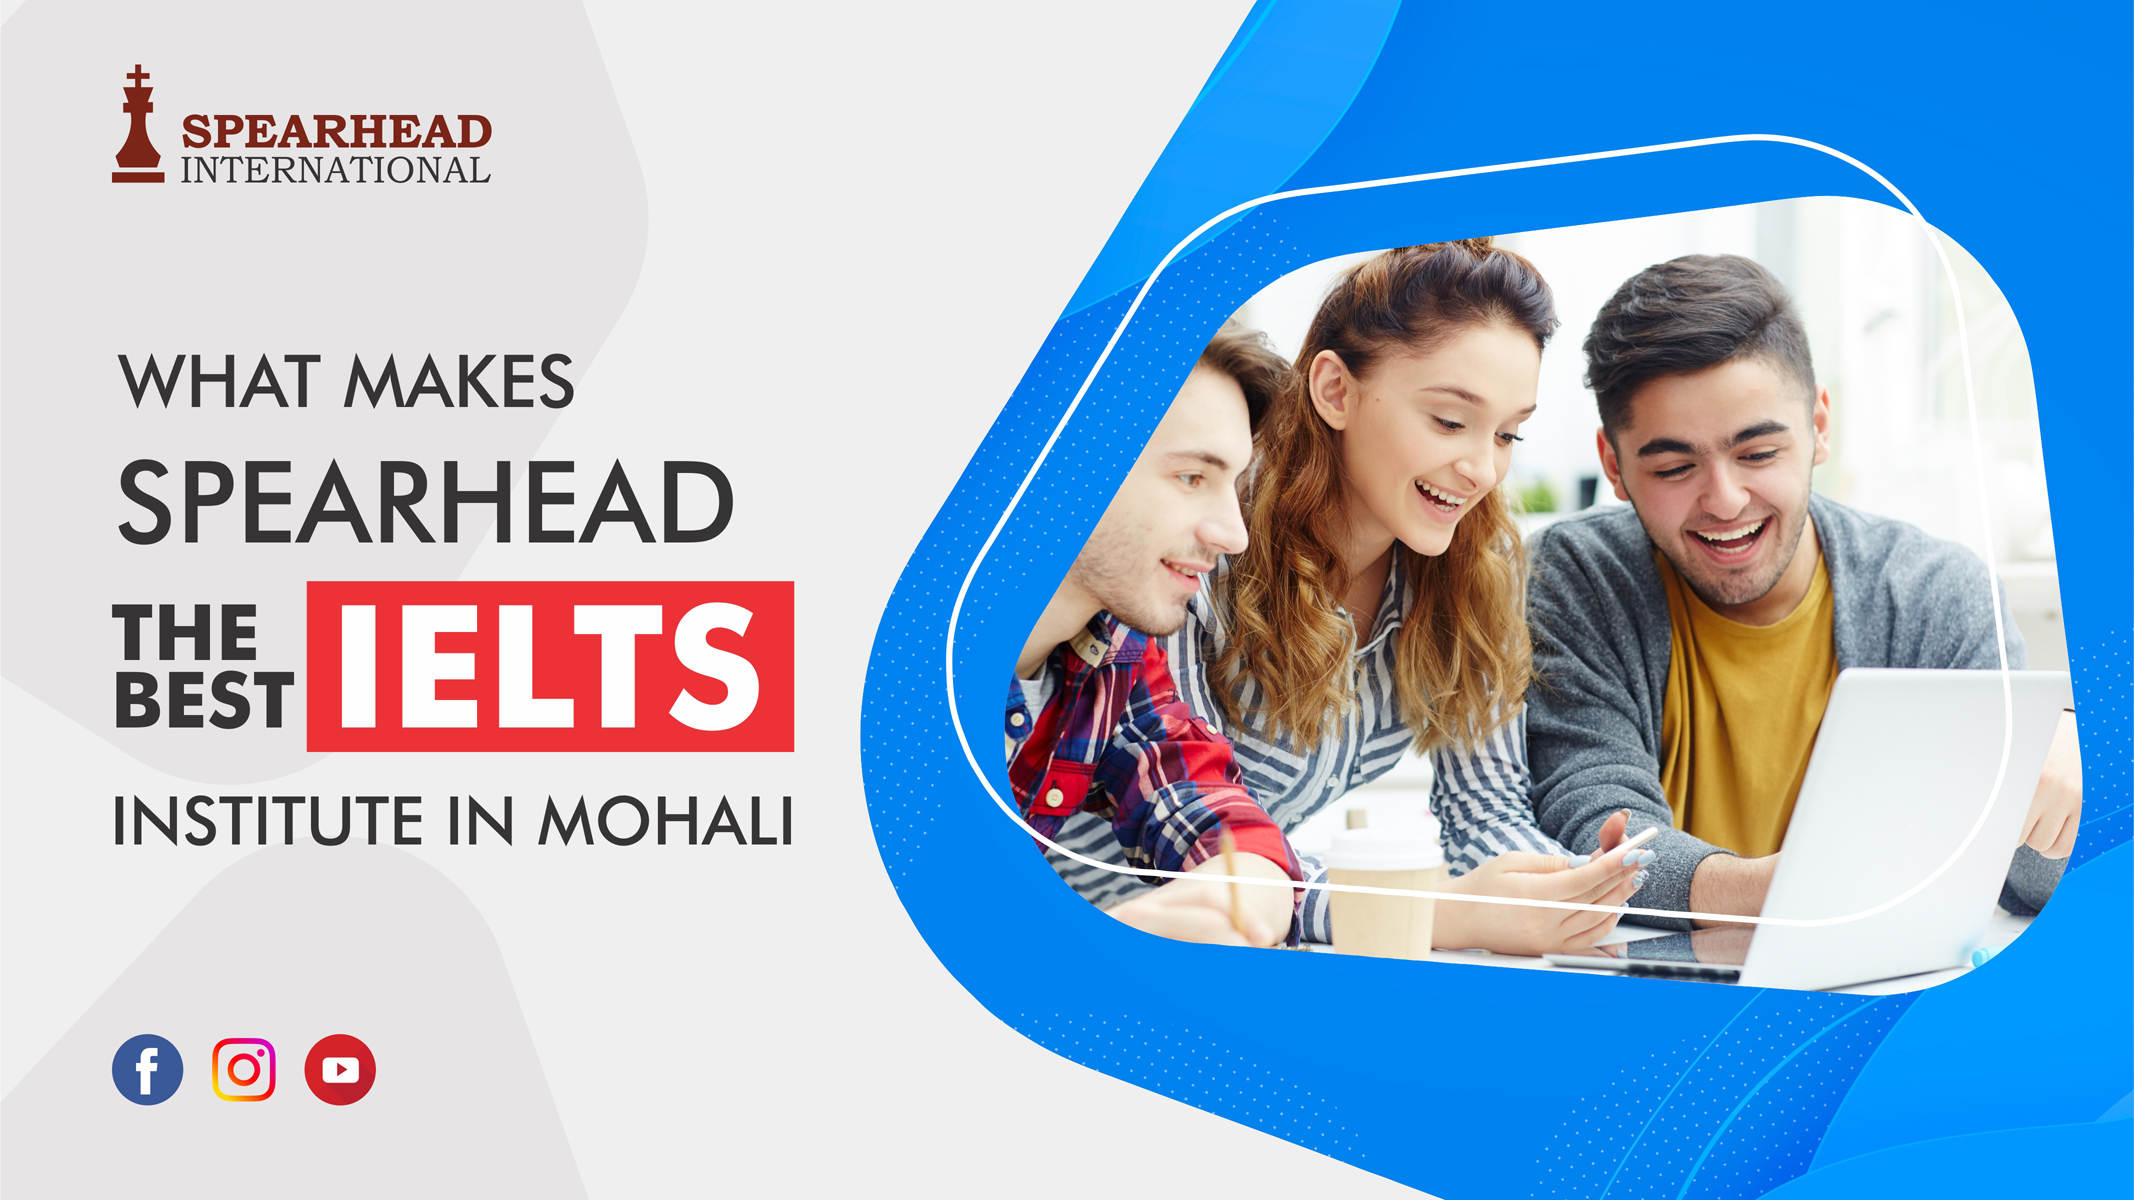 What makes Spearhead the best IELTS institute in Mohali